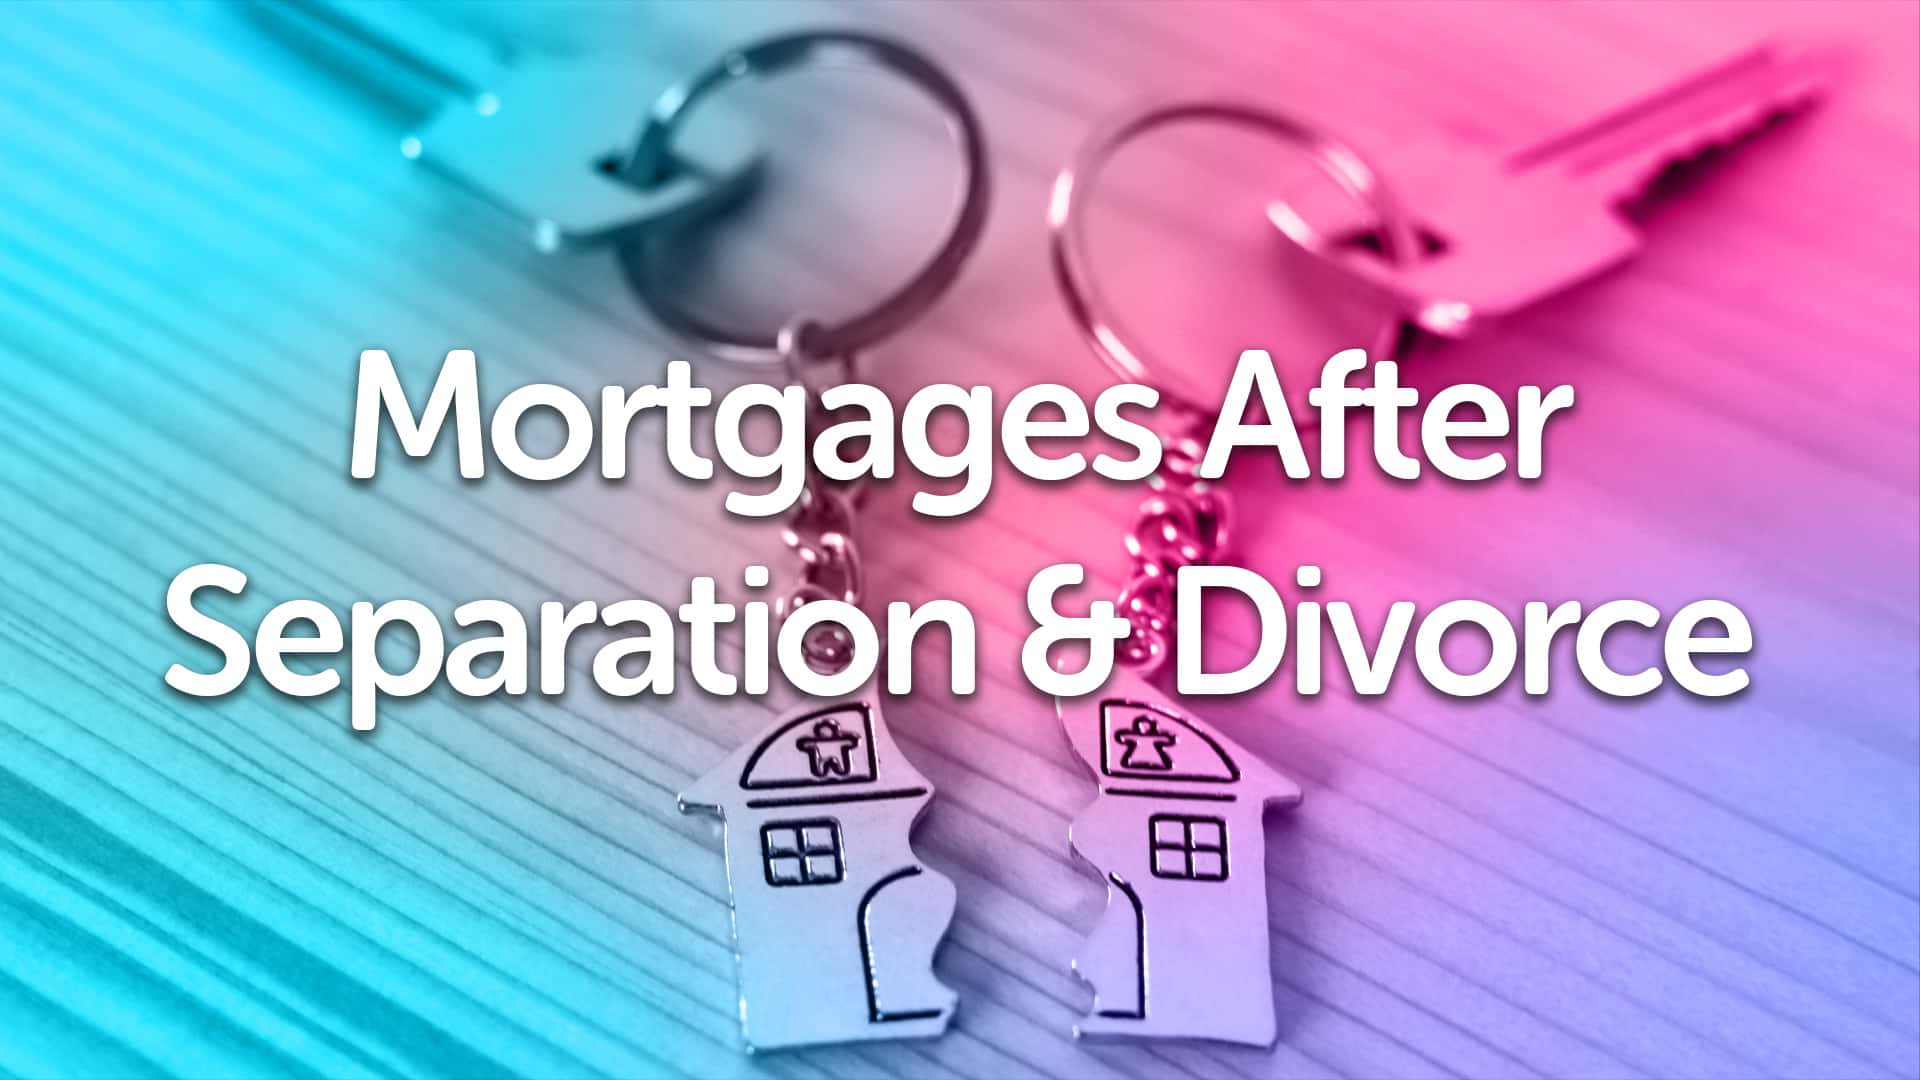 Divorce & Separation Mortgage Advice in Scunthorpe